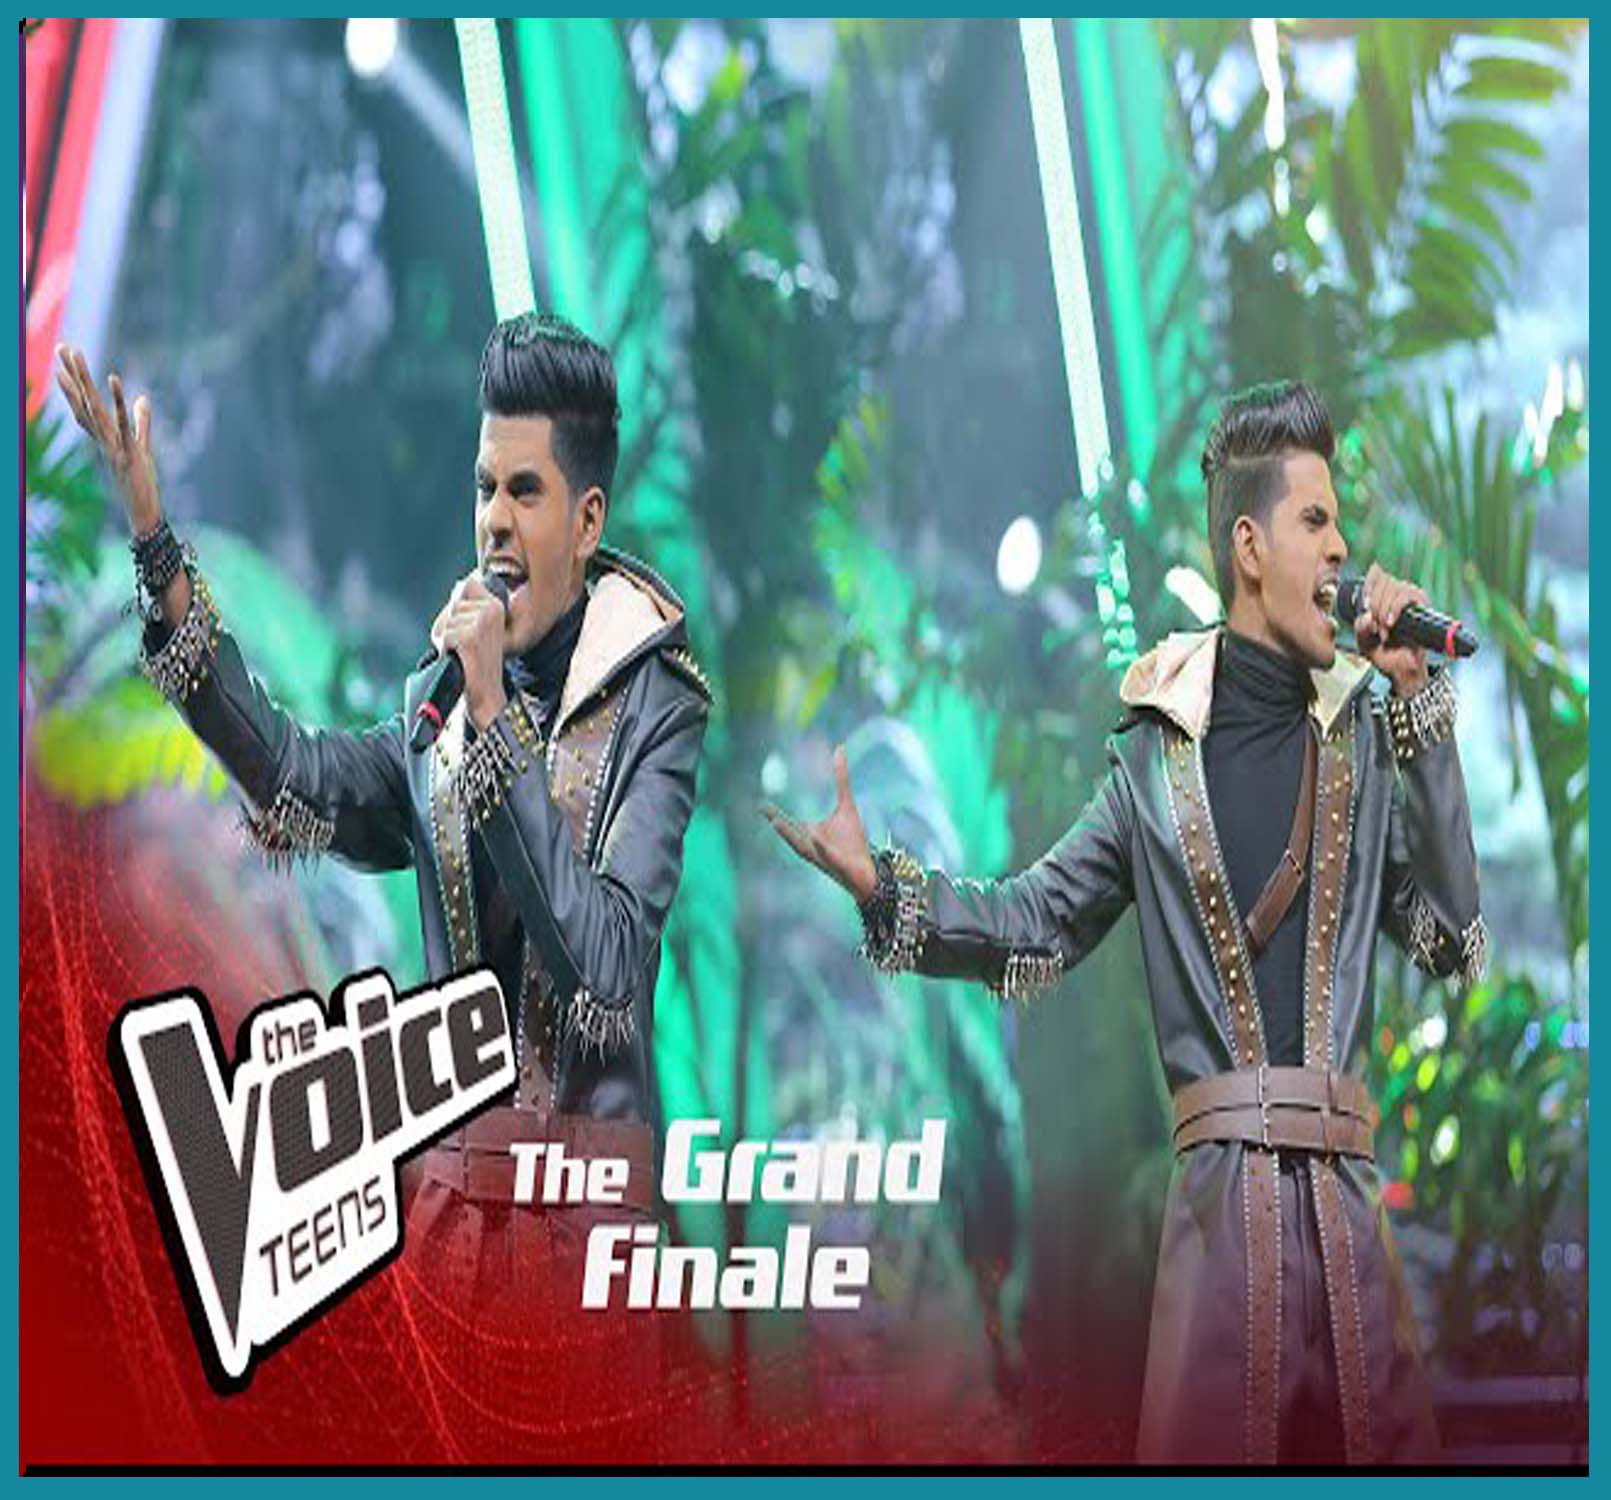 Wilpattuwe (The Voice Teens Grand Finale)